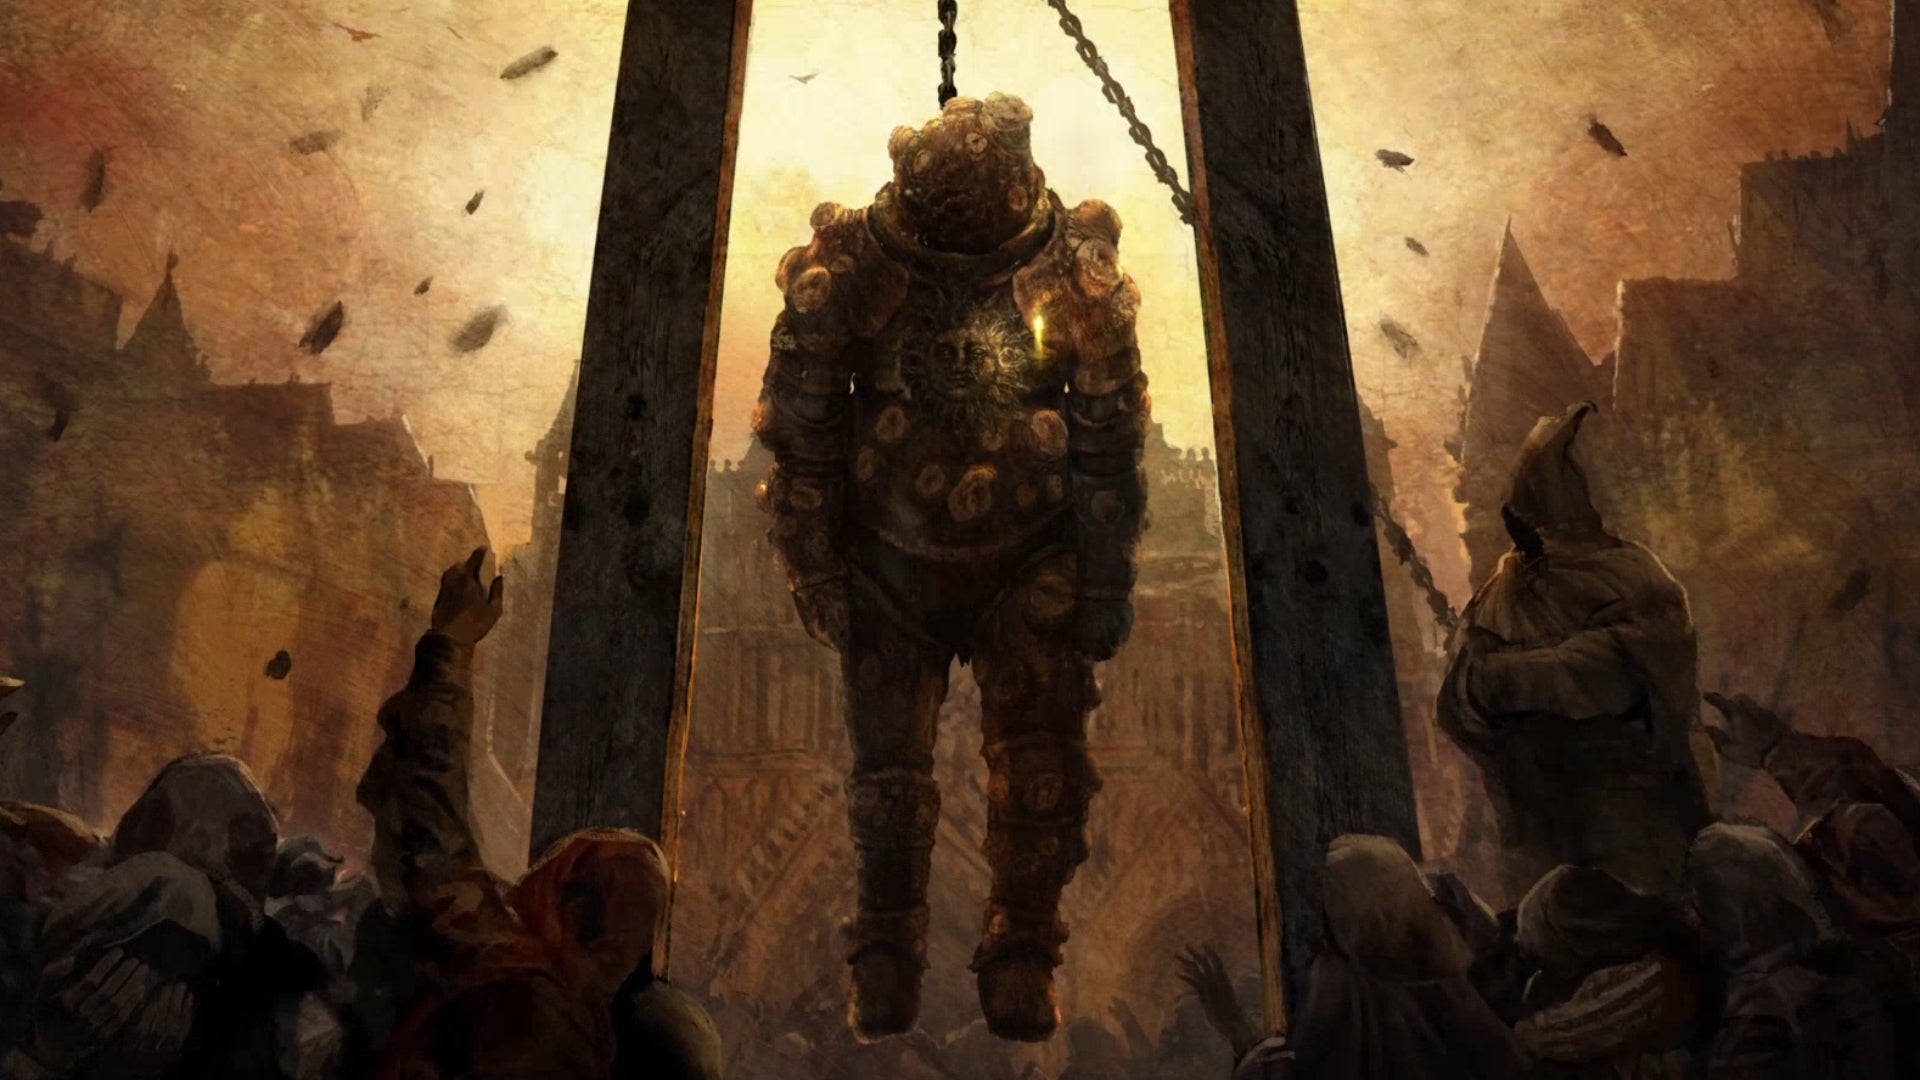 A screenshot from a cutscene in Elden Ring depicting the Loathsome Dung Eater being hanged by a group of people.